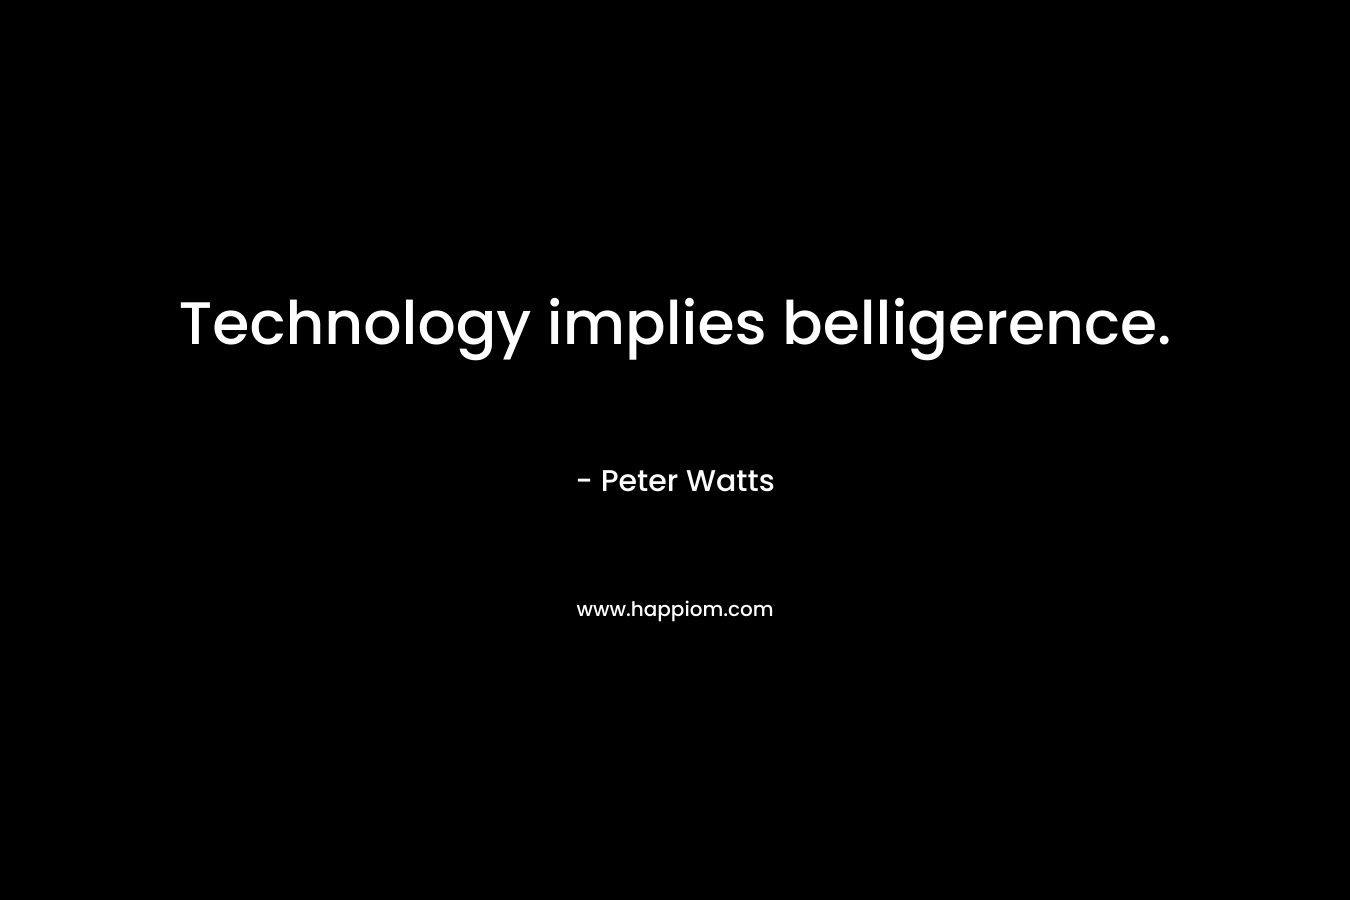 Technology implies belligerence.